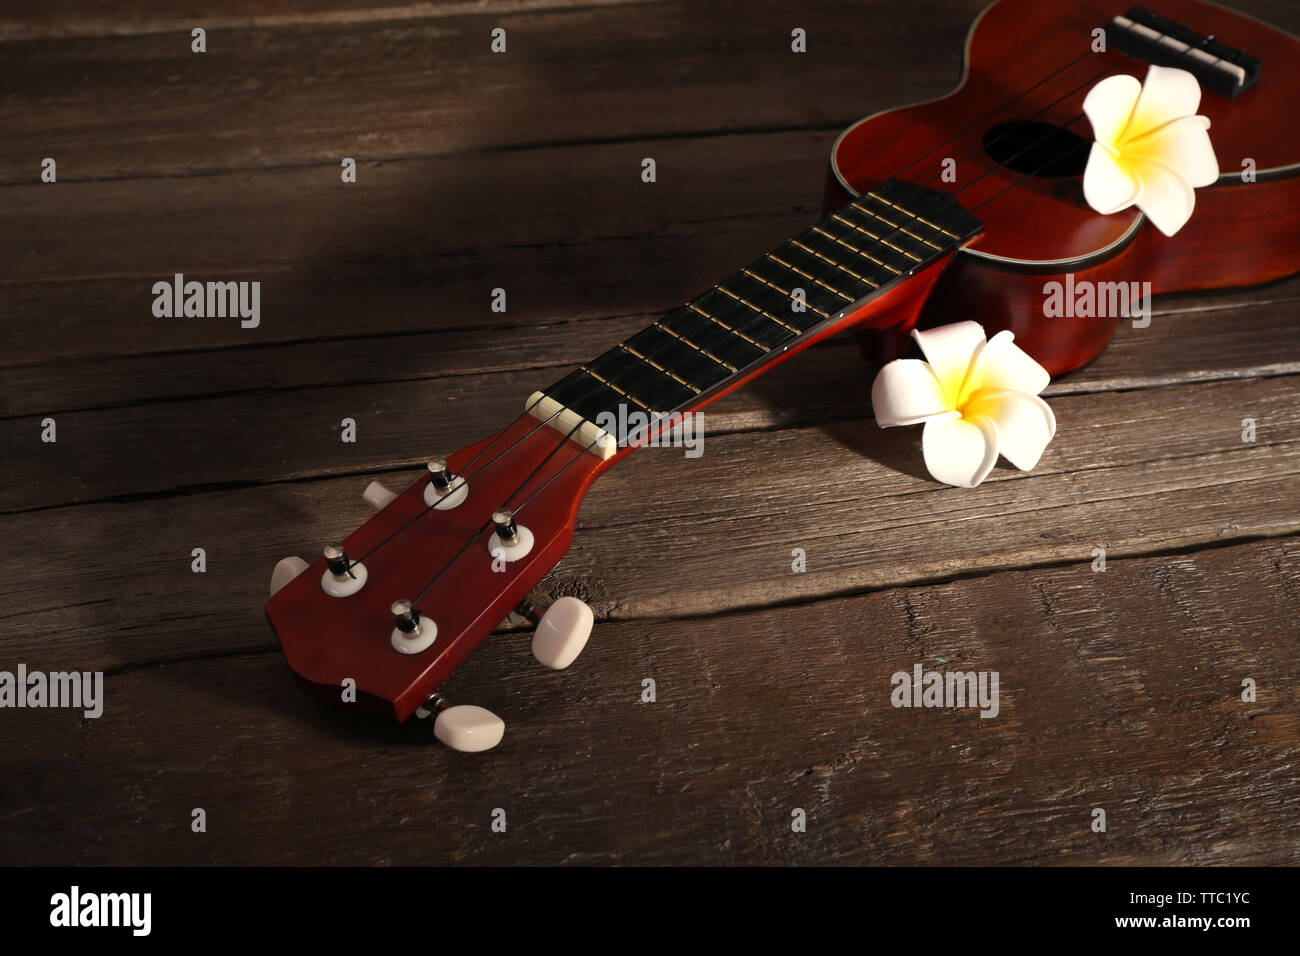 Part of Hawaiian acoustic guitar and flowers on dark wooden background Stock Photo